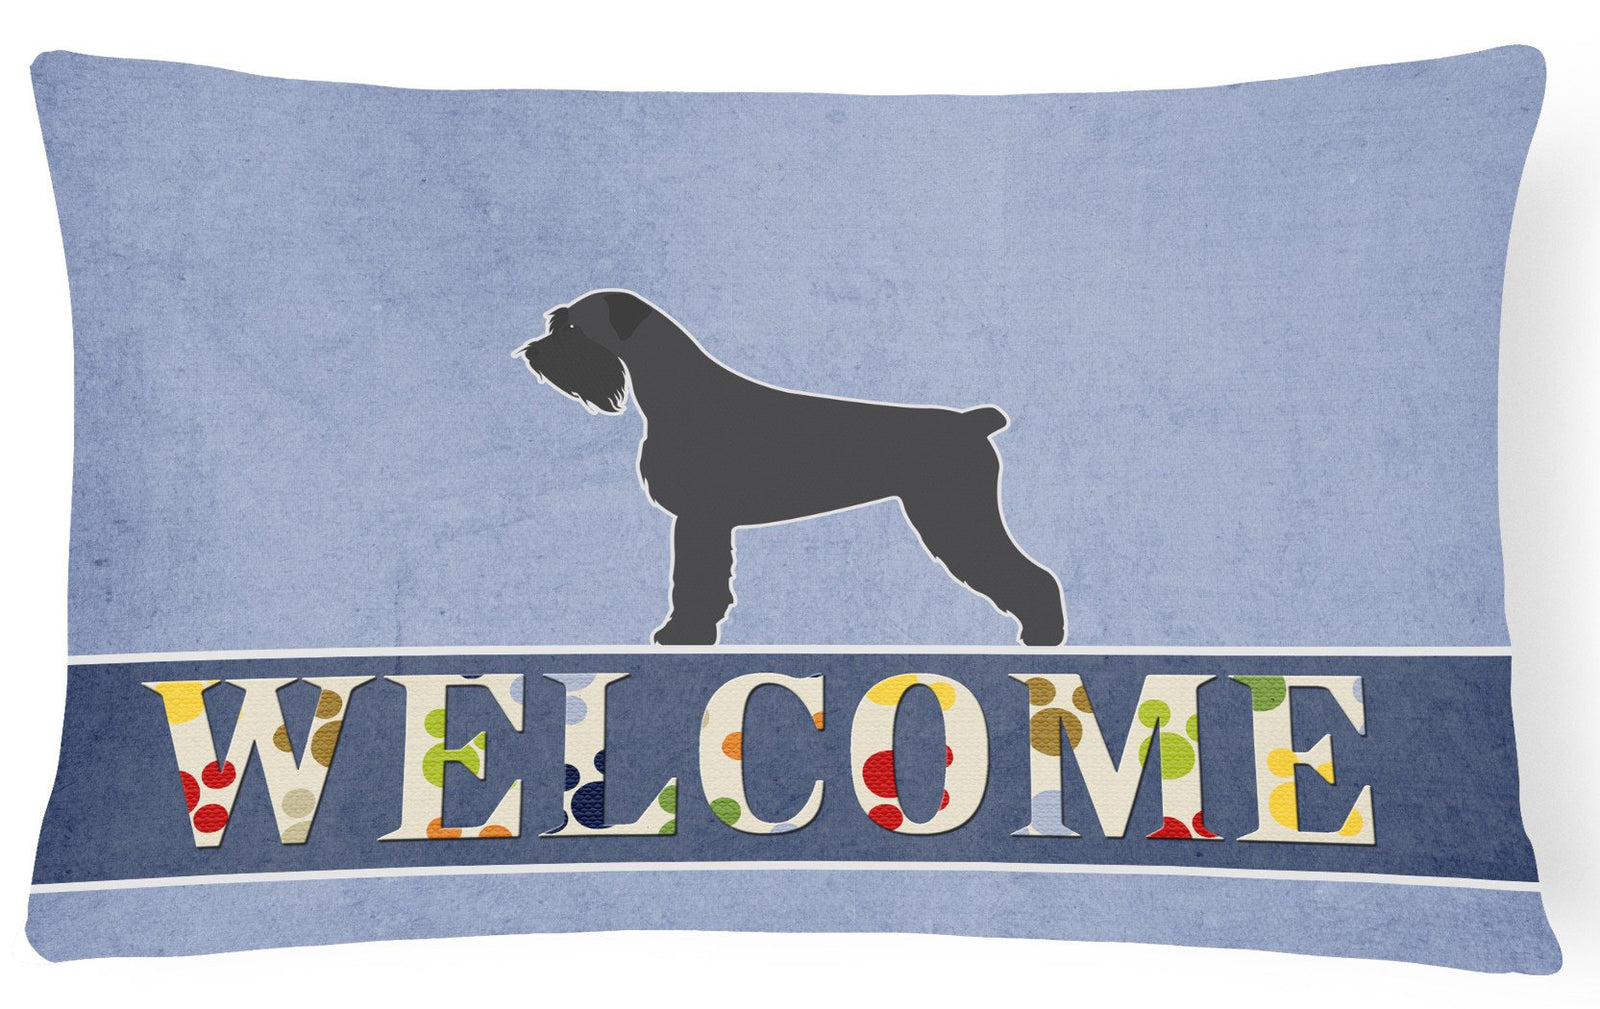 Giant Schnauzer Welcome Canvas Fabric Decorative Pillow BB5577PW1216 by Caroline's Treasures